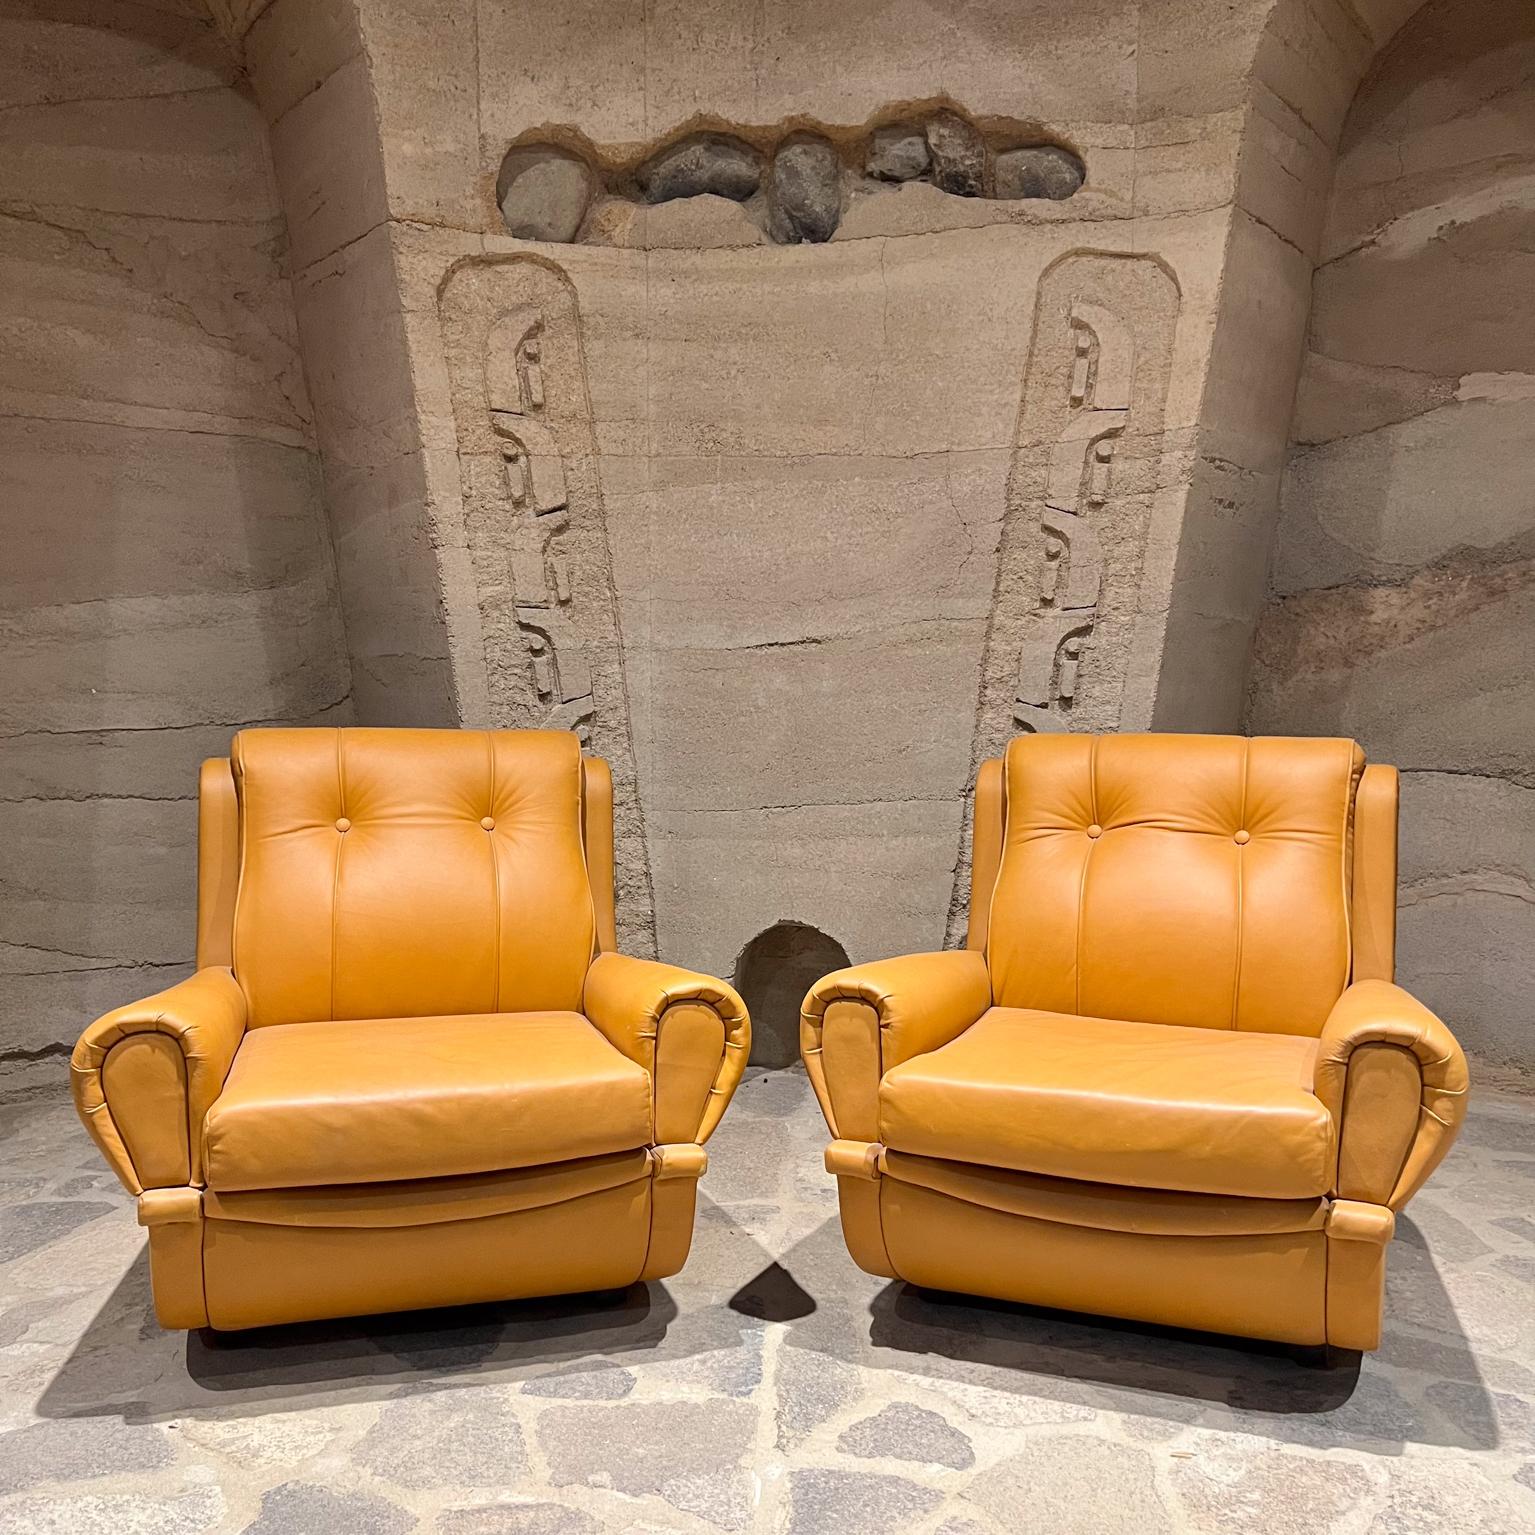 1960s Italian Leather Lounge Chairs Camel
Chairs acquired northern Italy.
Designed by Giuseppe Munari of Italy for Poltrona
Classic curved deco design inspired by French Jean Michel Frank.
Unmarked.
Extremely comfortable great ergonomic design.
Arm